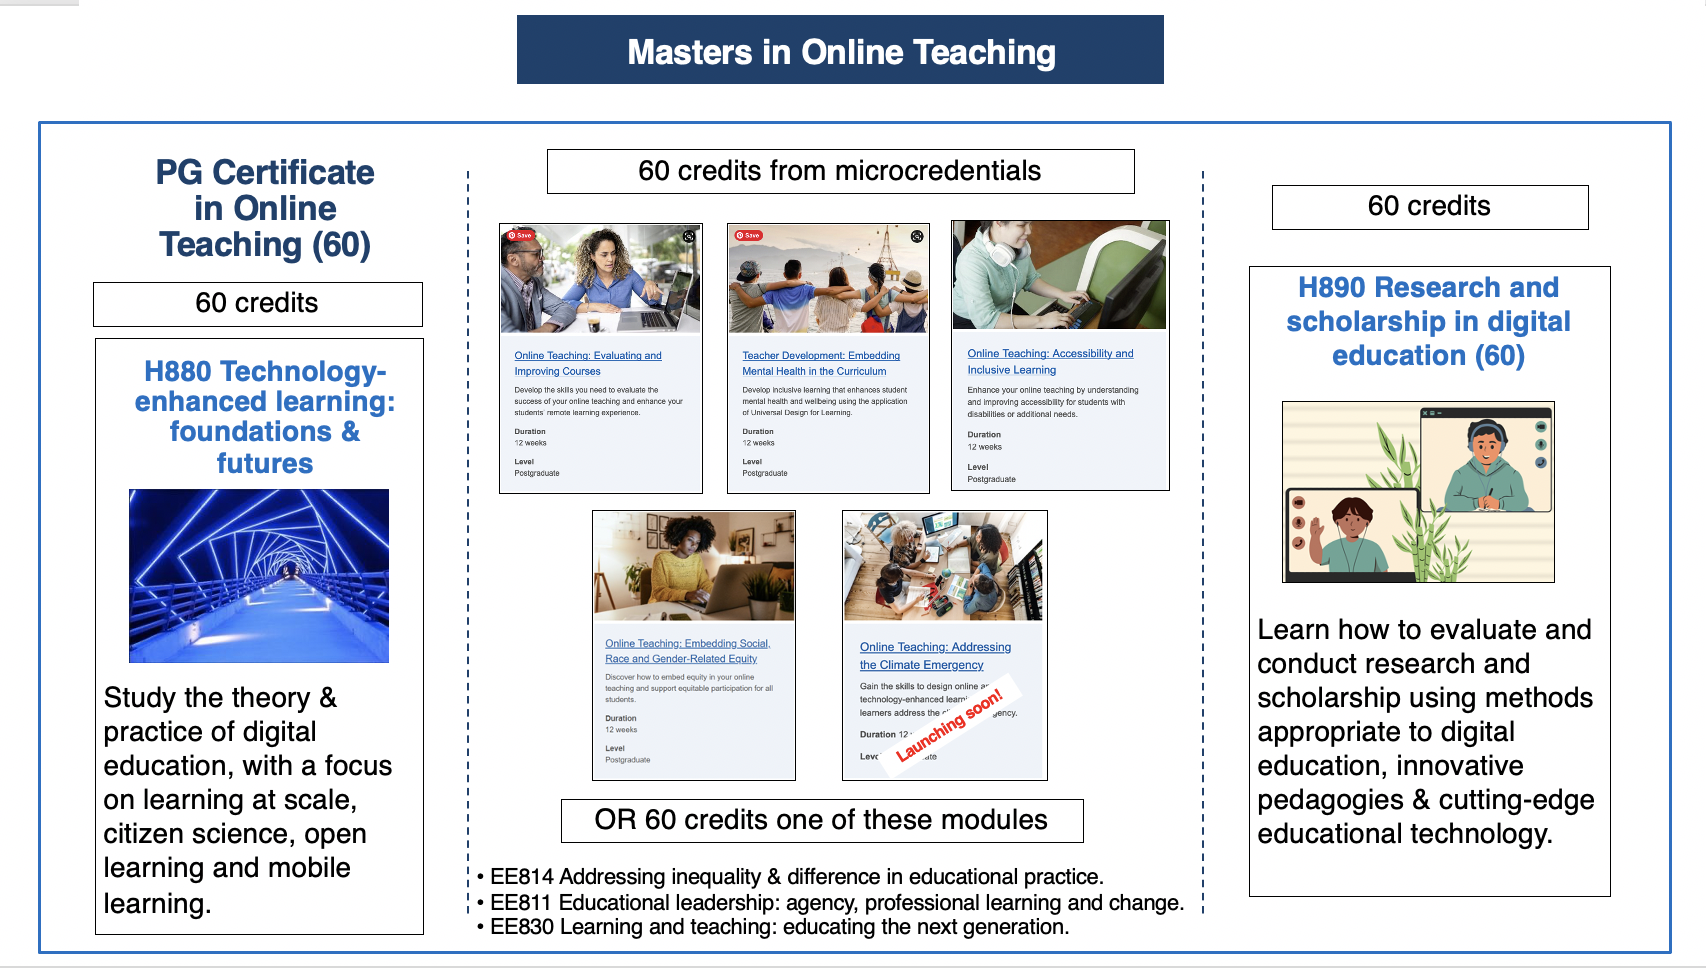 Diagram showing the structure of the Masters in Online Teaching